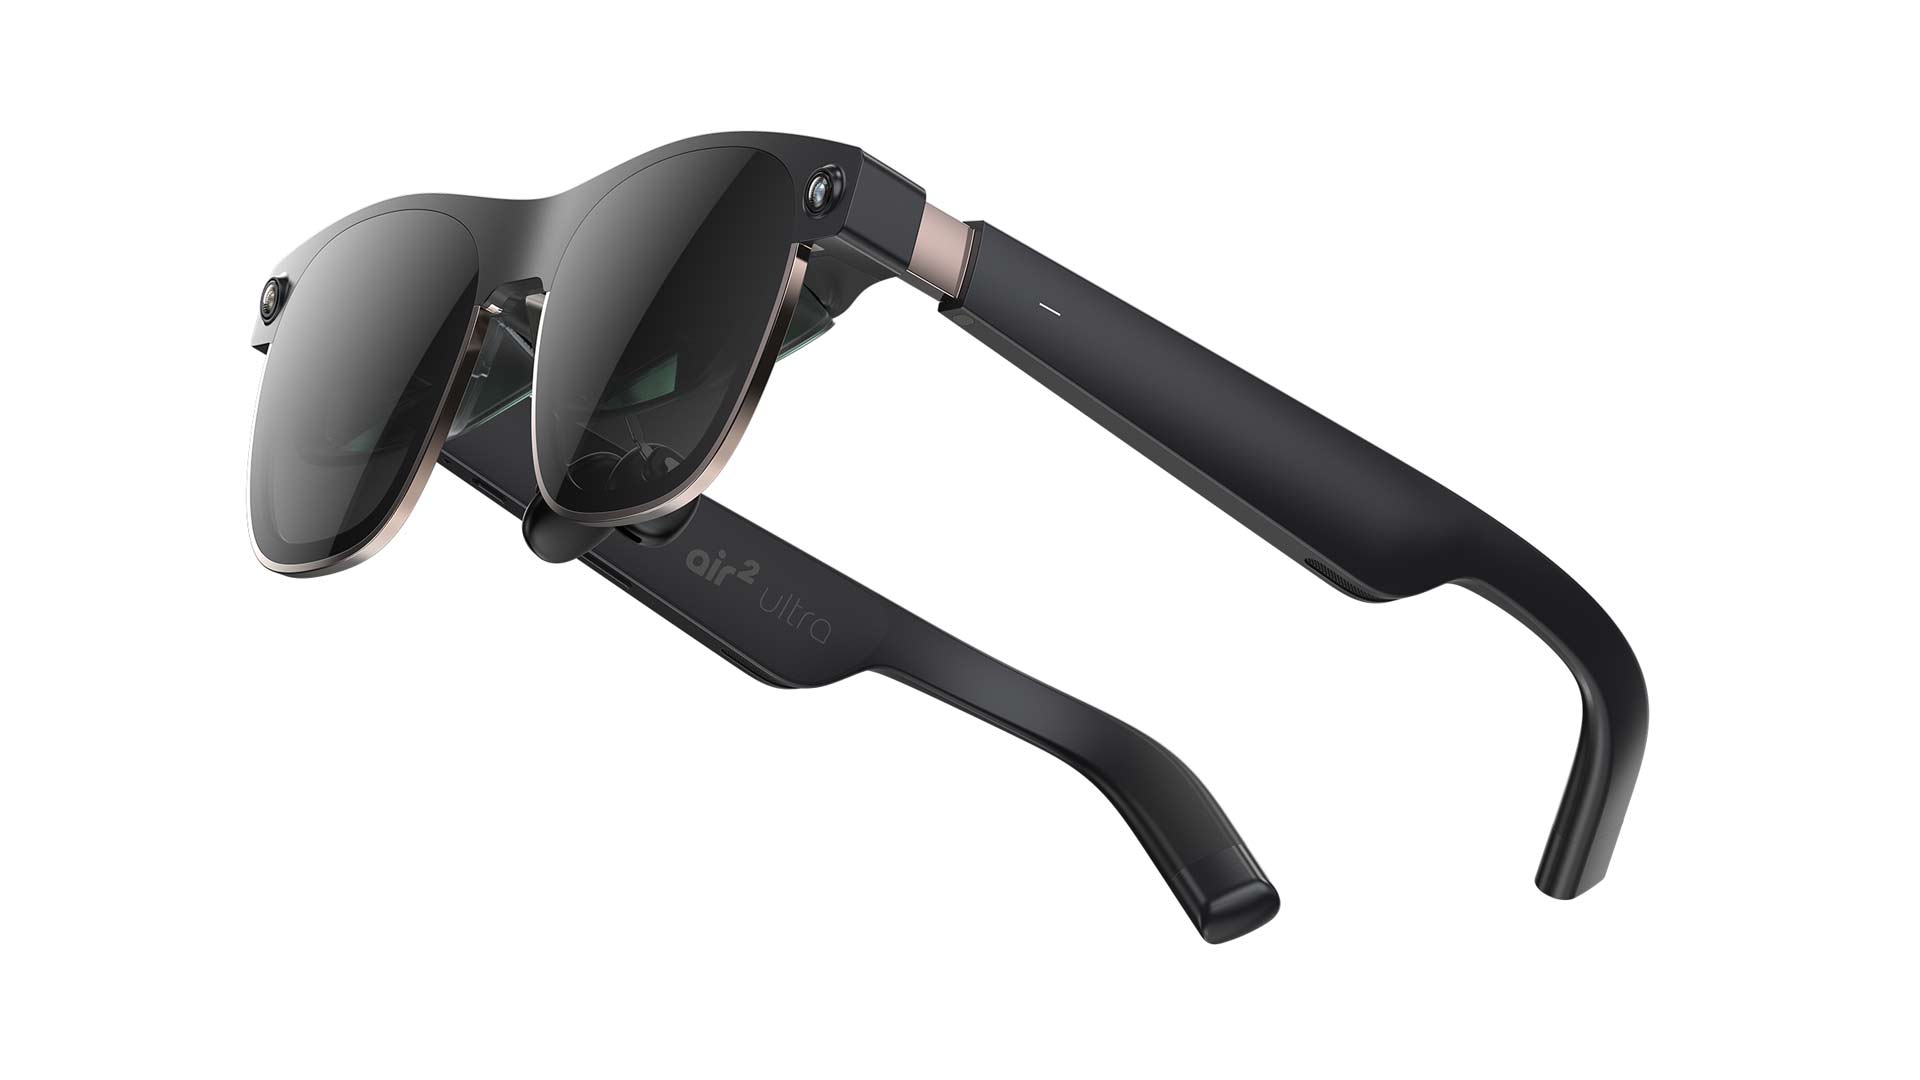 Xreal Announces Air 2 Ultra AR Glasses Ahead of Apple Vision Pro Release